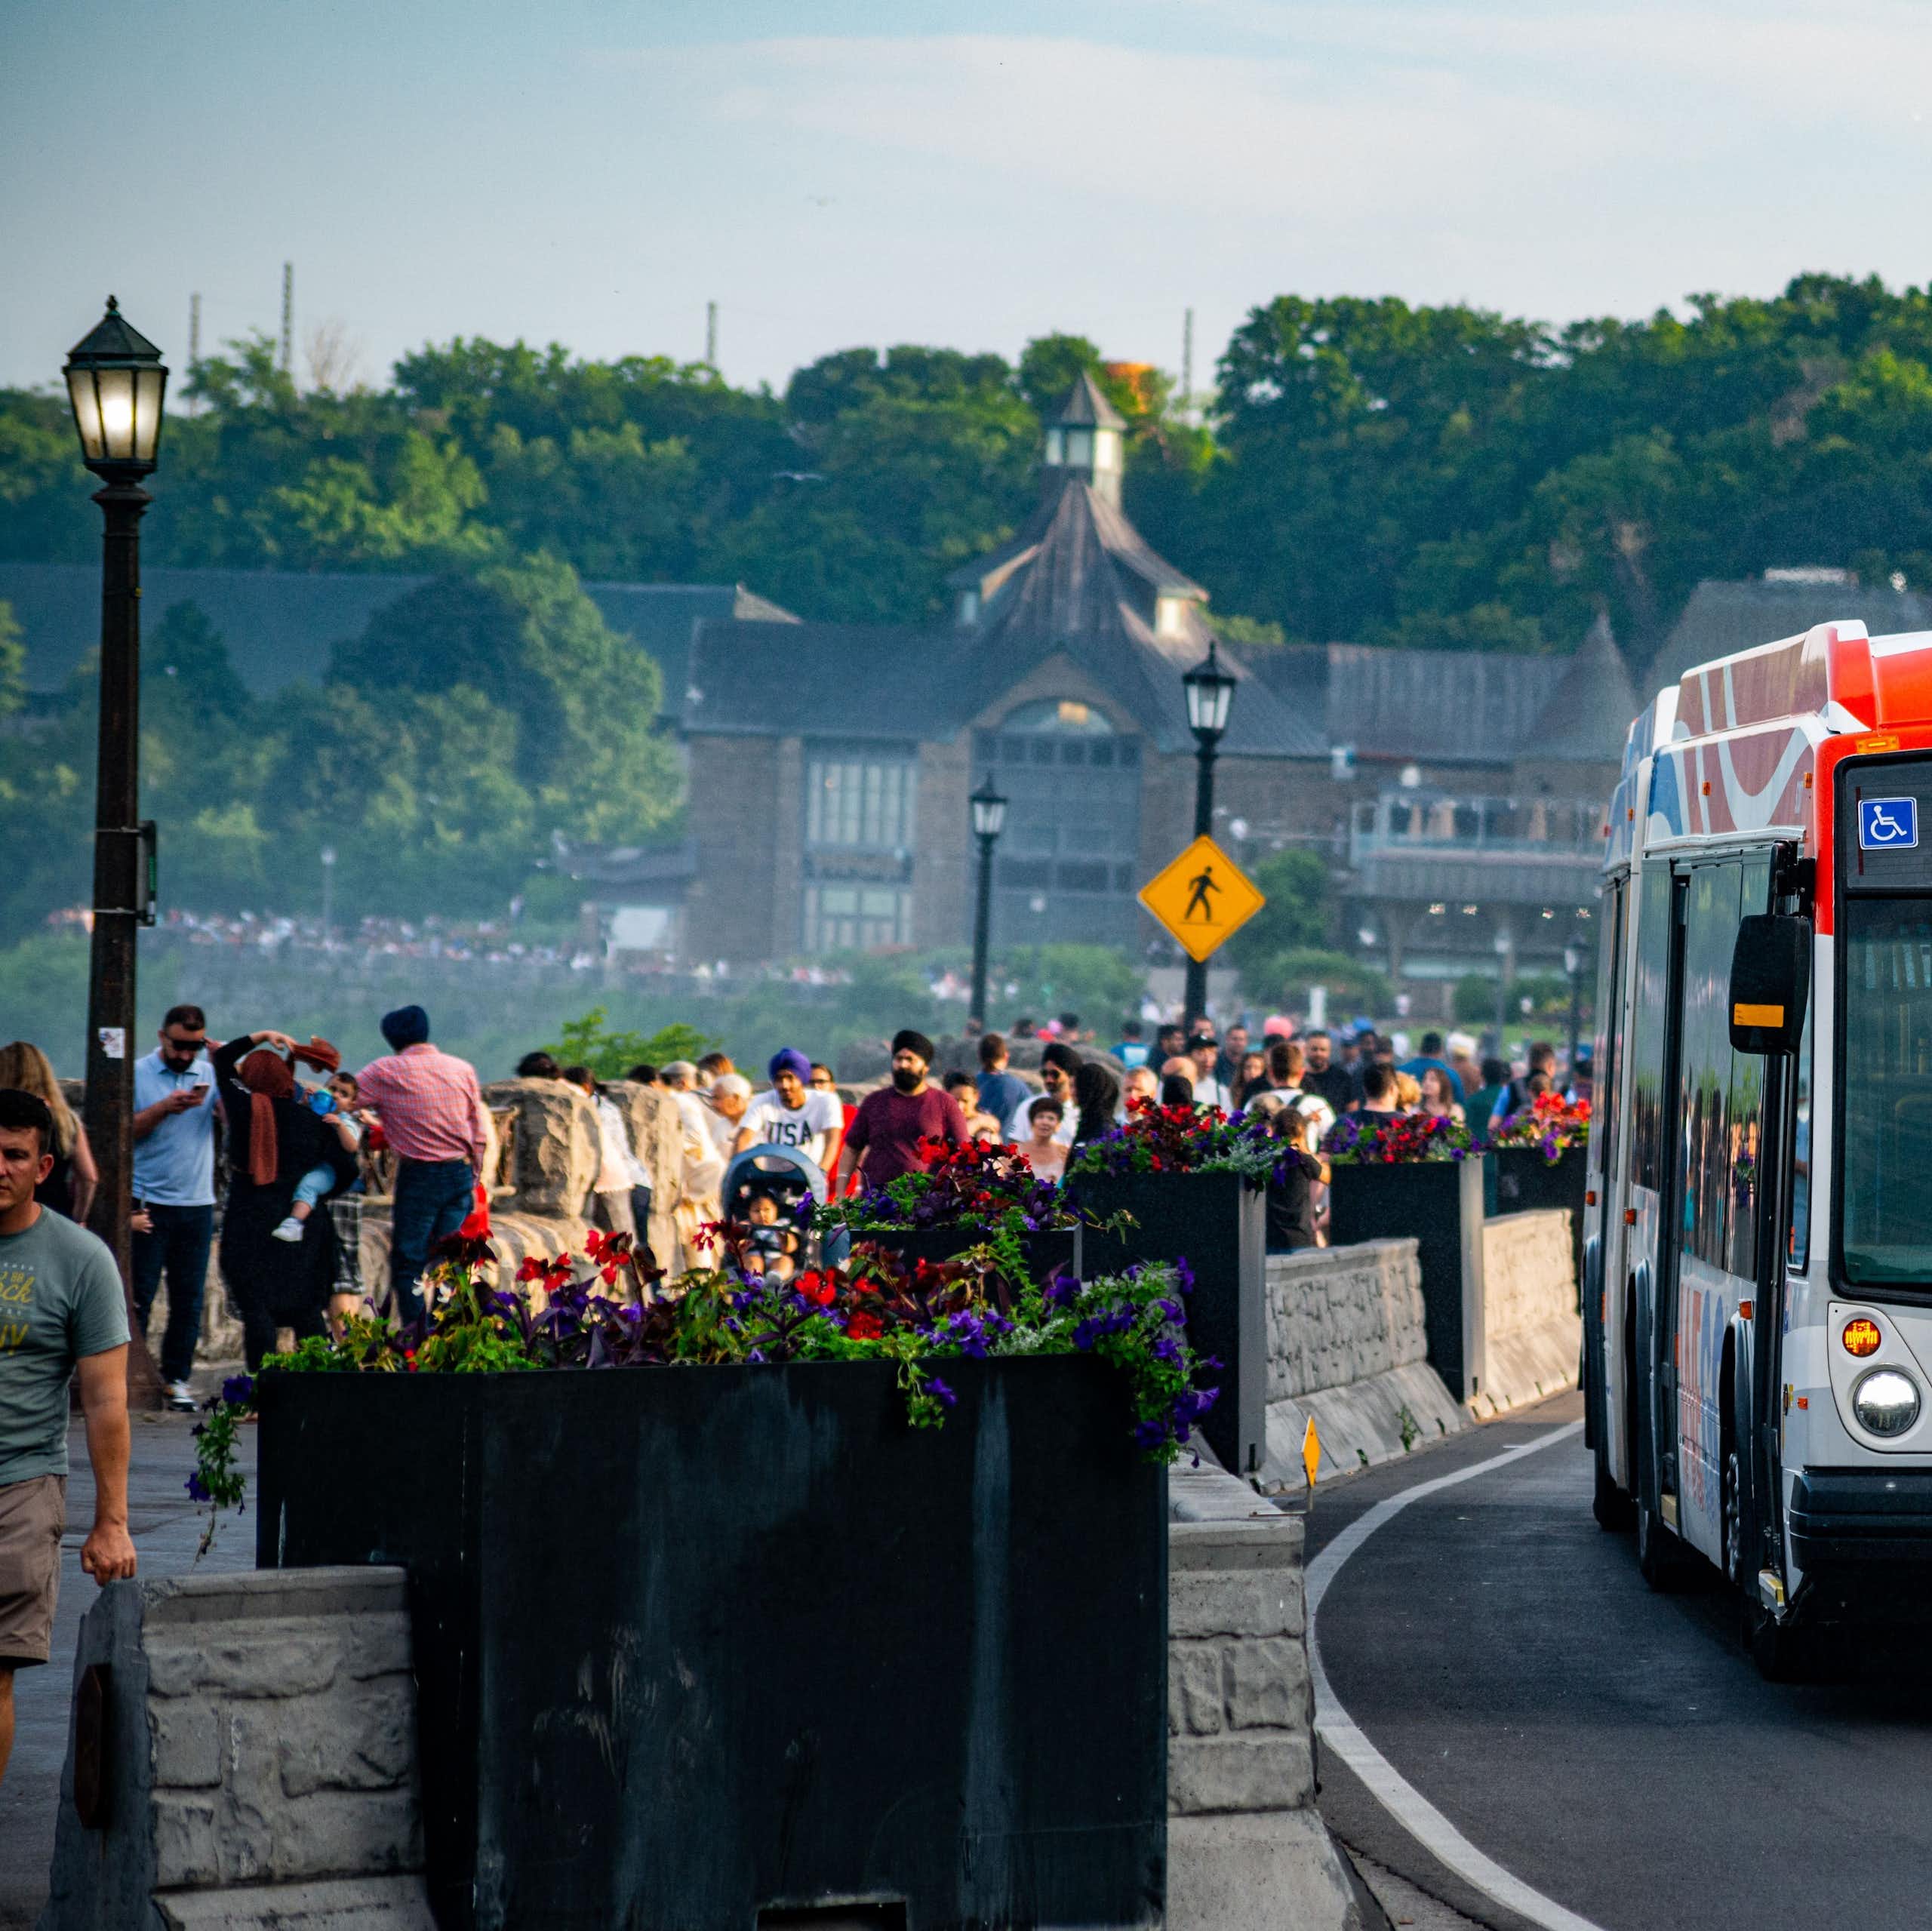 an orange bus drives past throngs of tourists looking at waterfalls